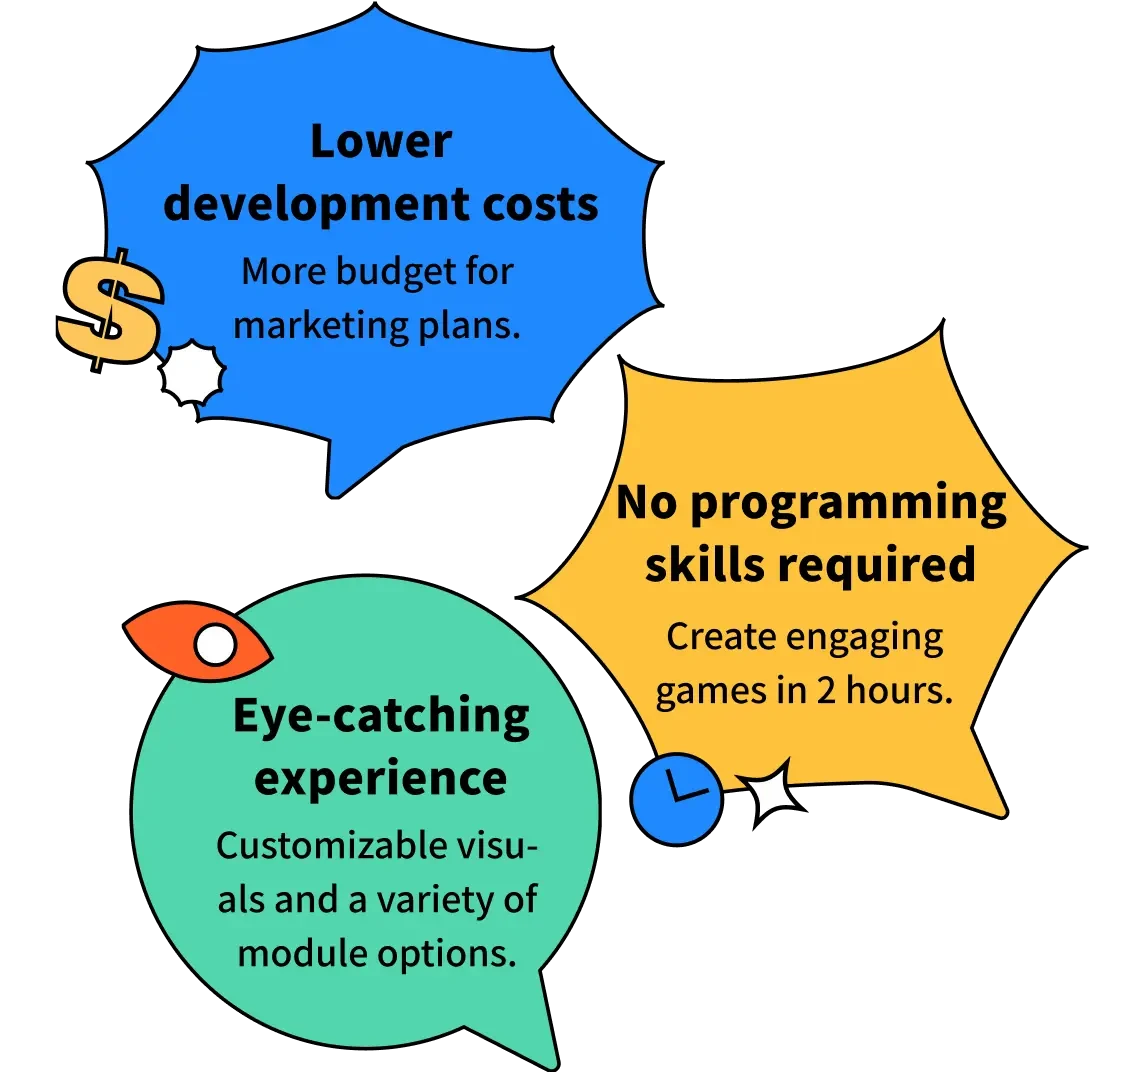 Lower development costs, no programming background required, engaging experience and visuals.